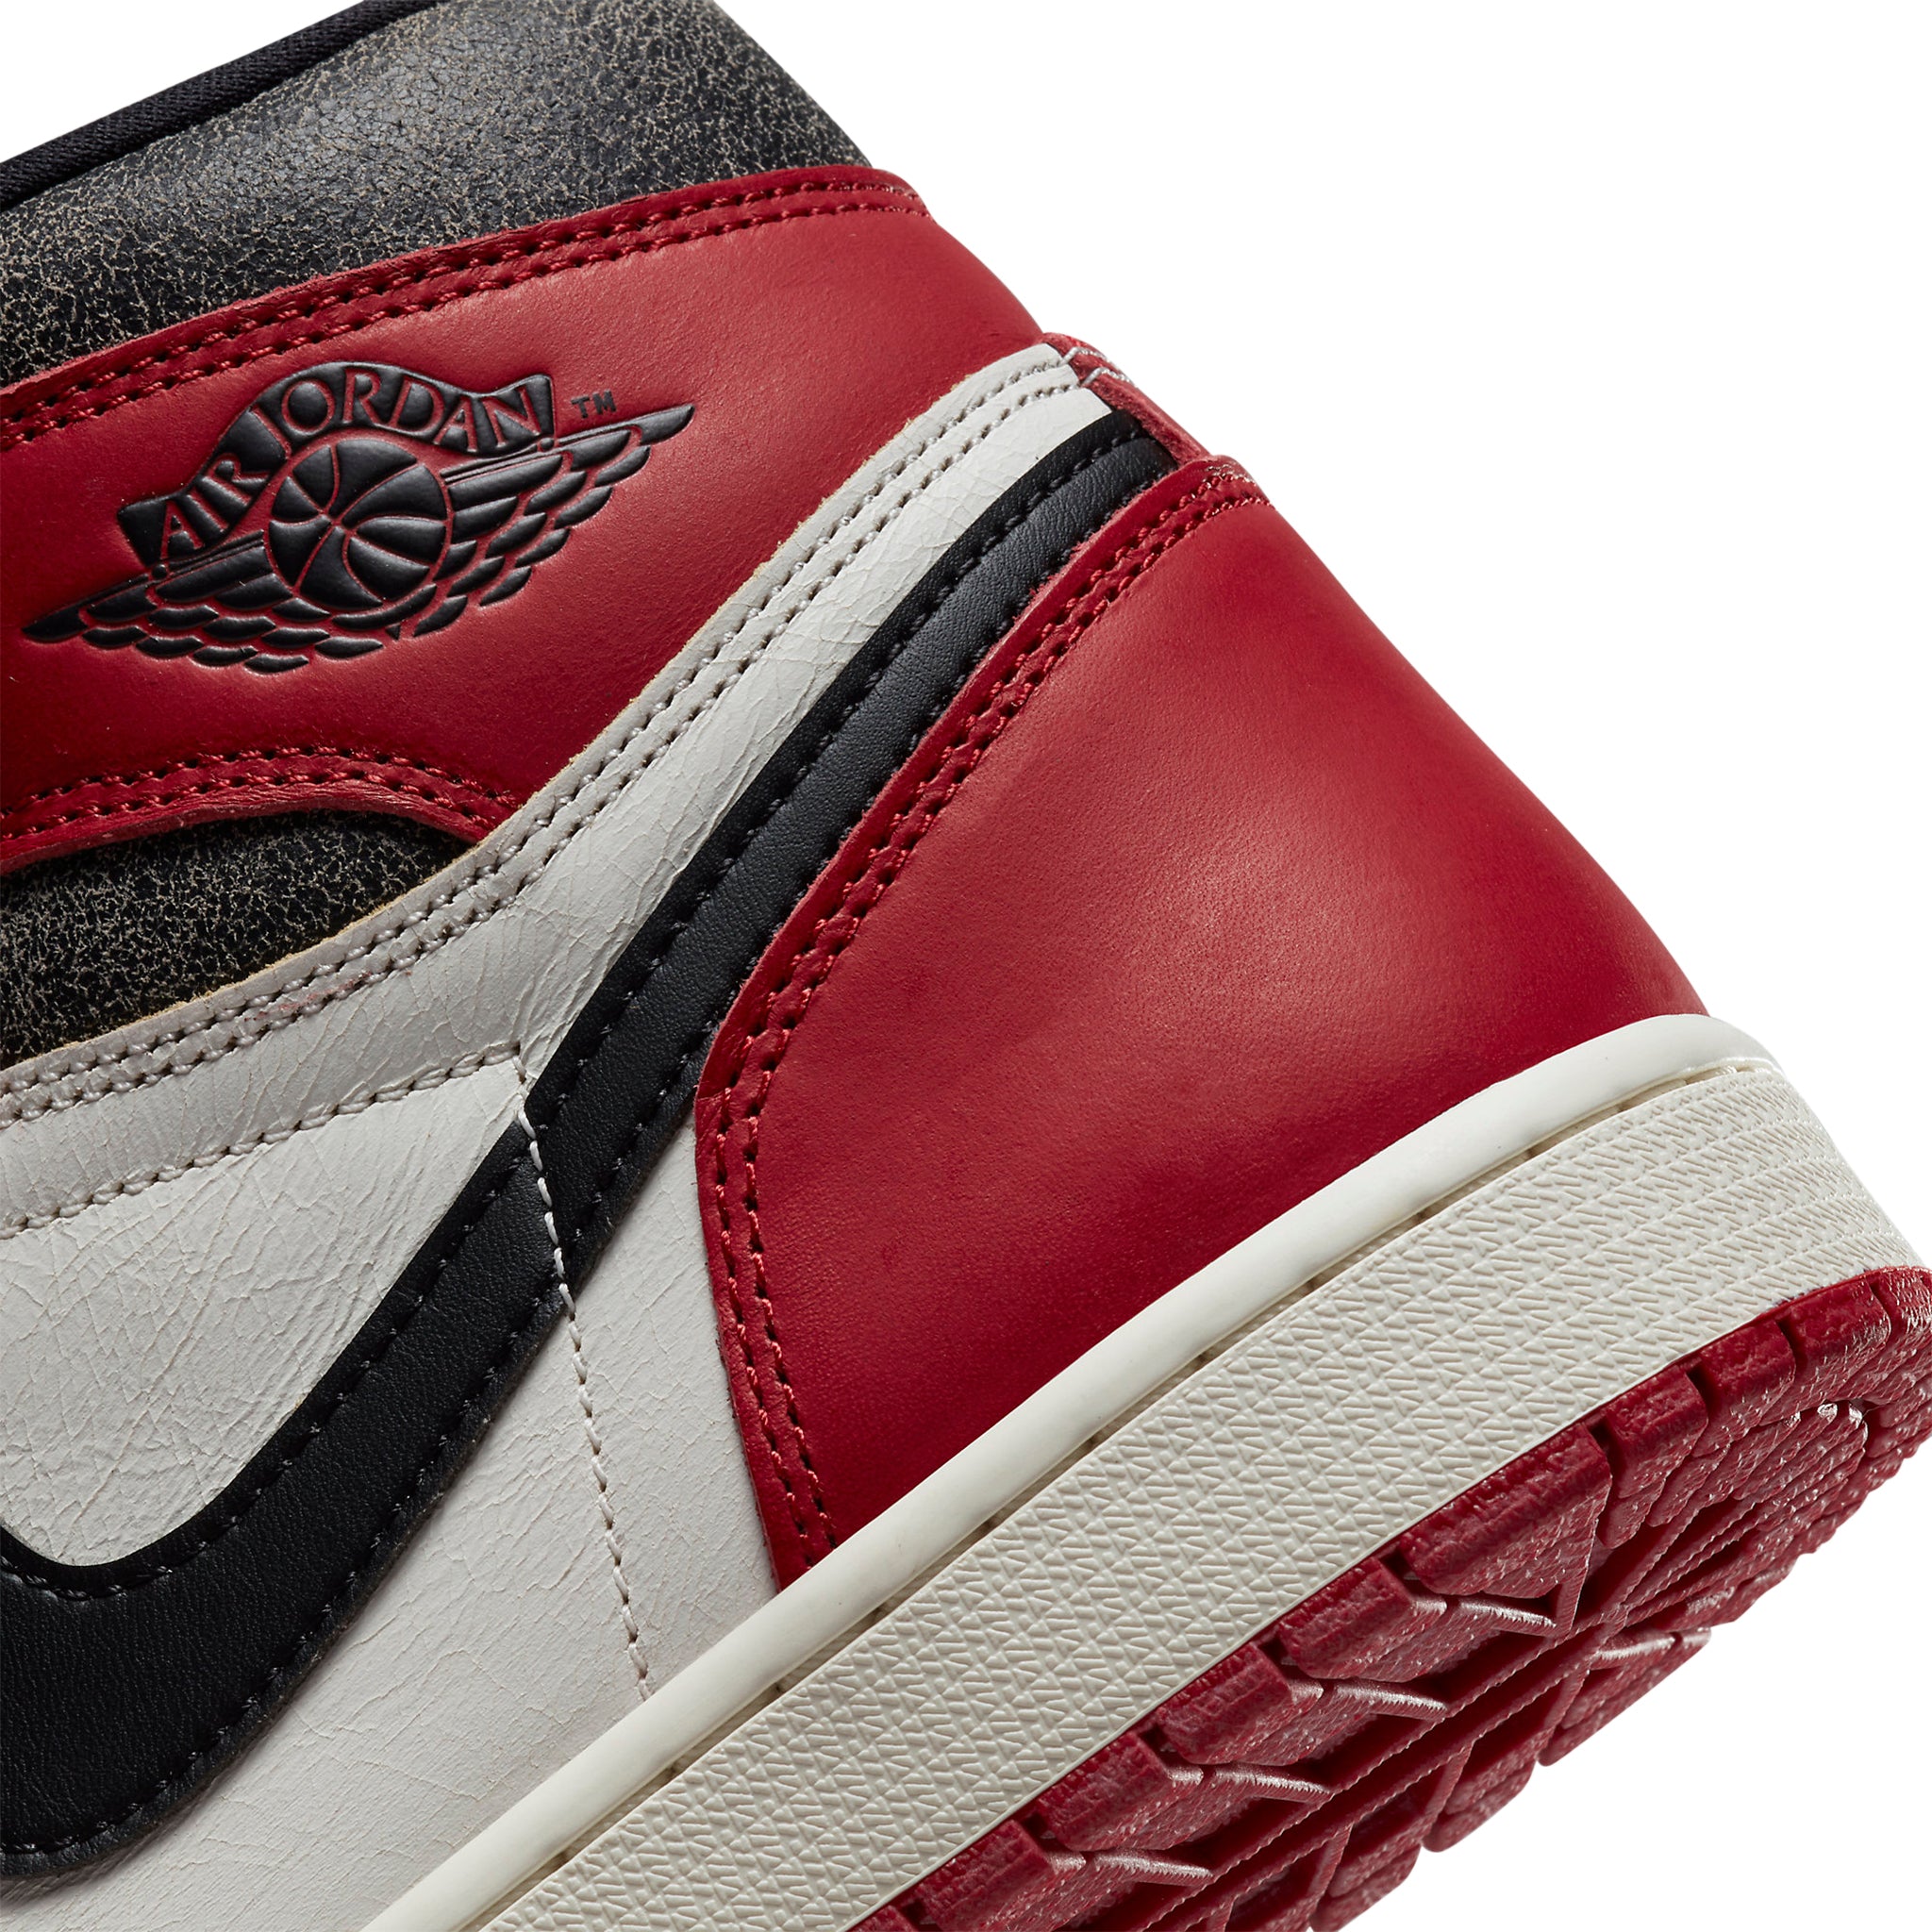 Wings logo view of Air Jordan 1 Retro High OG Lost And Found DZ5485-612